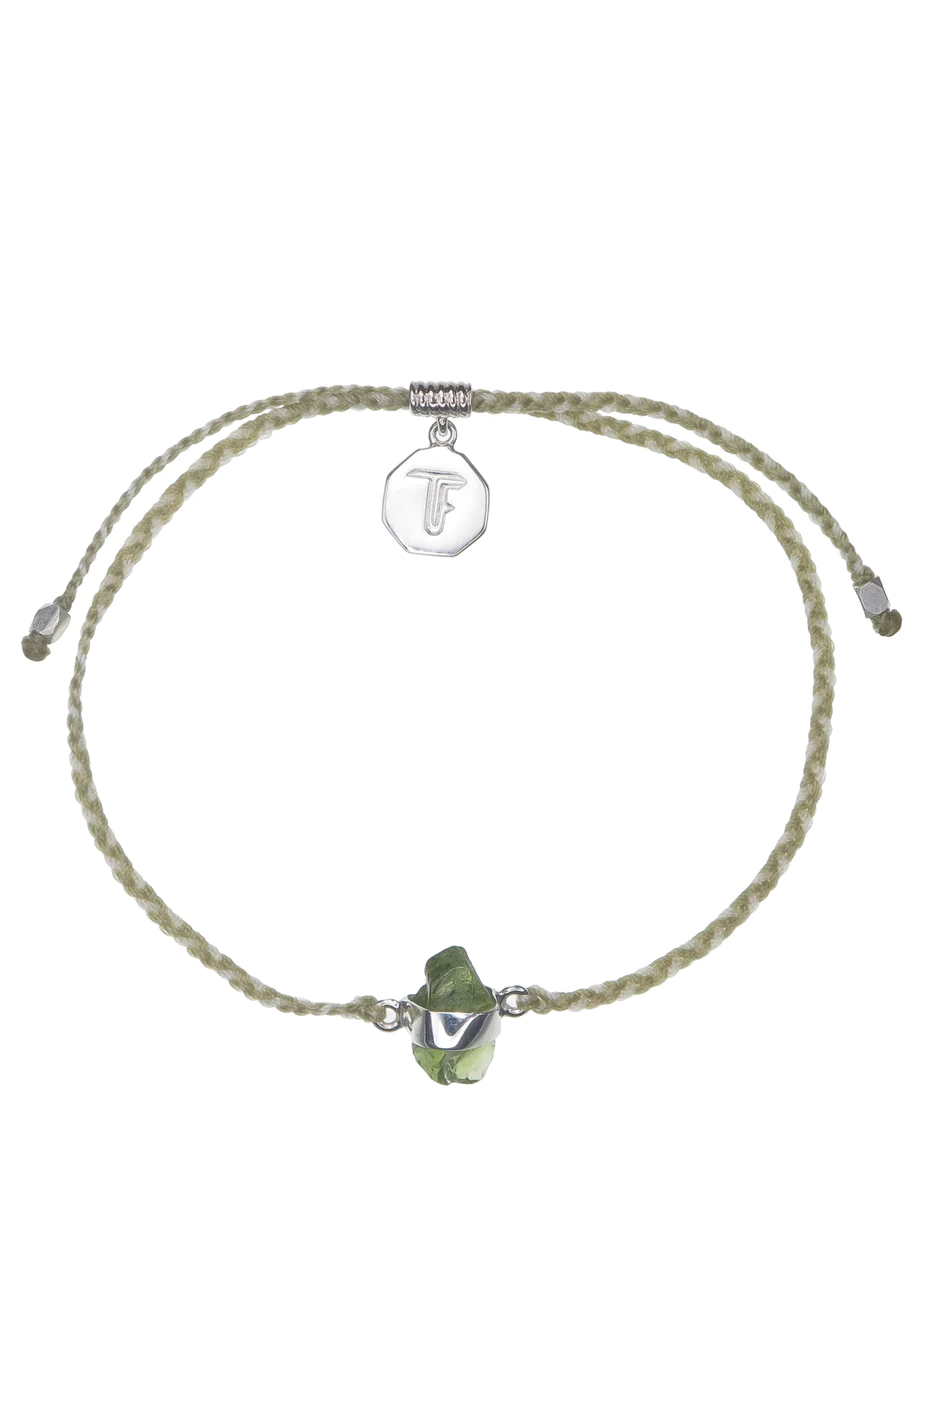 Peridot Crystal Bracelet | Sage Green and Cream - Silver